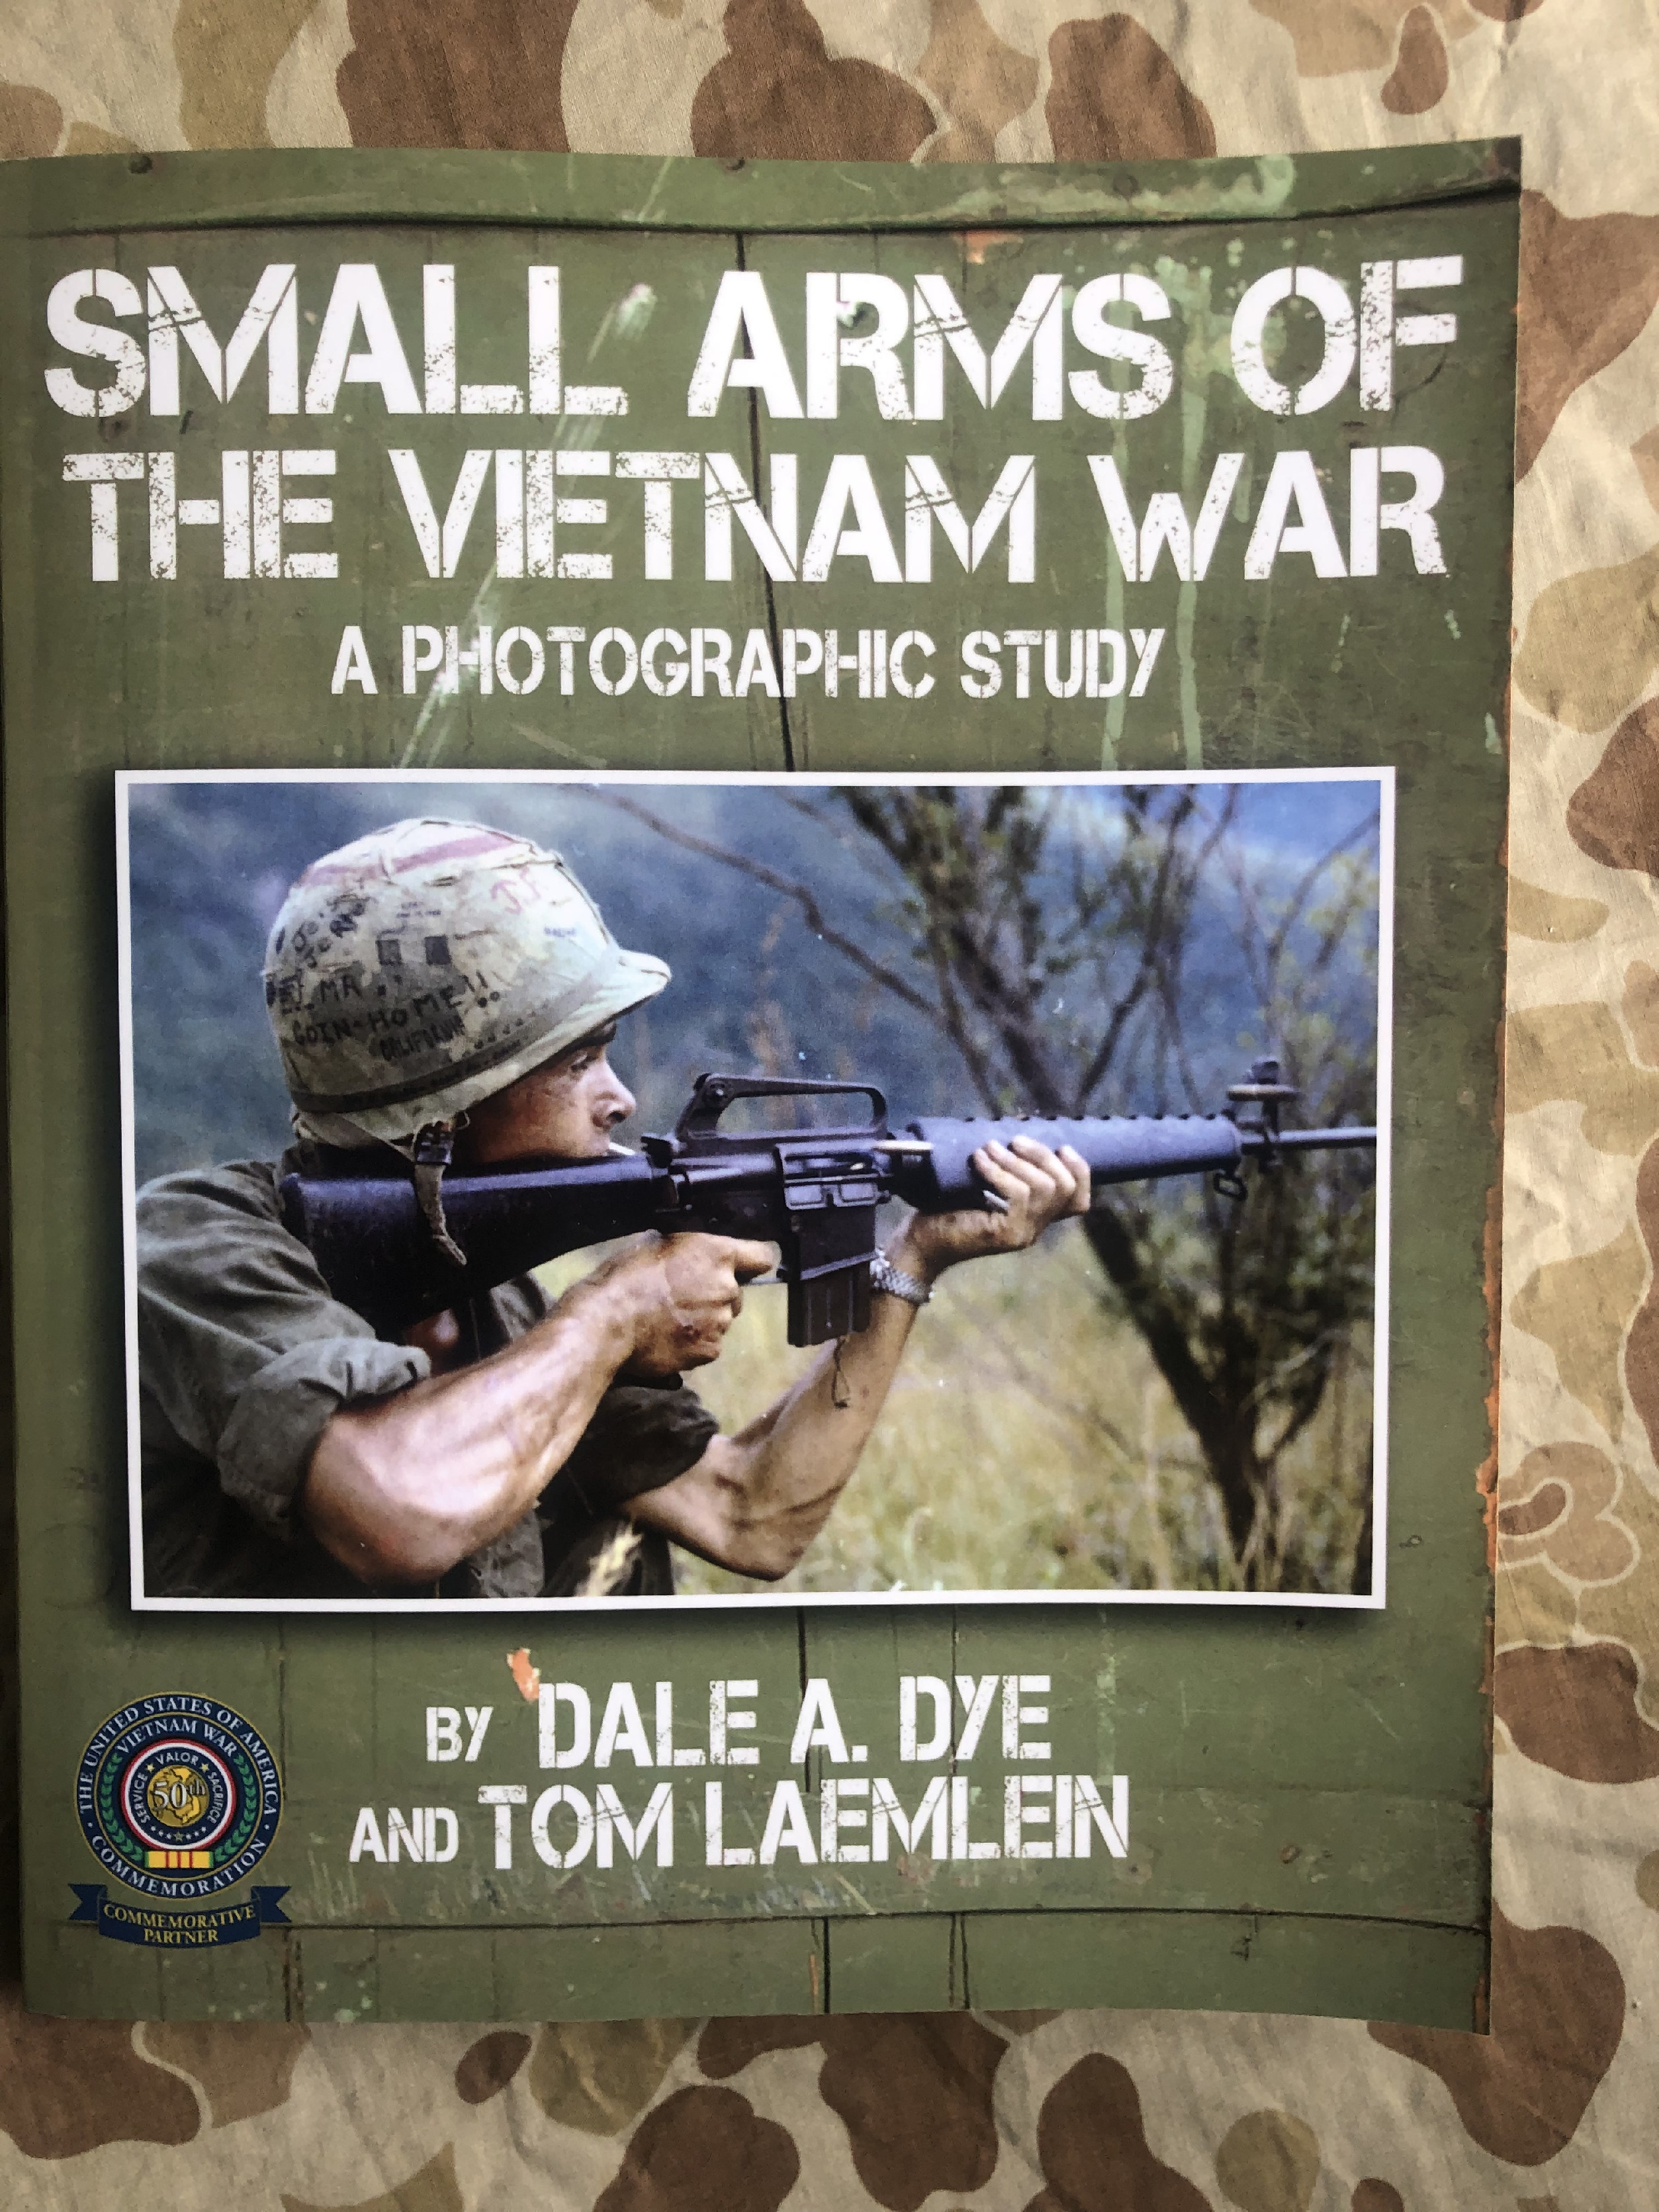 Kniha "Small Arms of the Vietnam War"